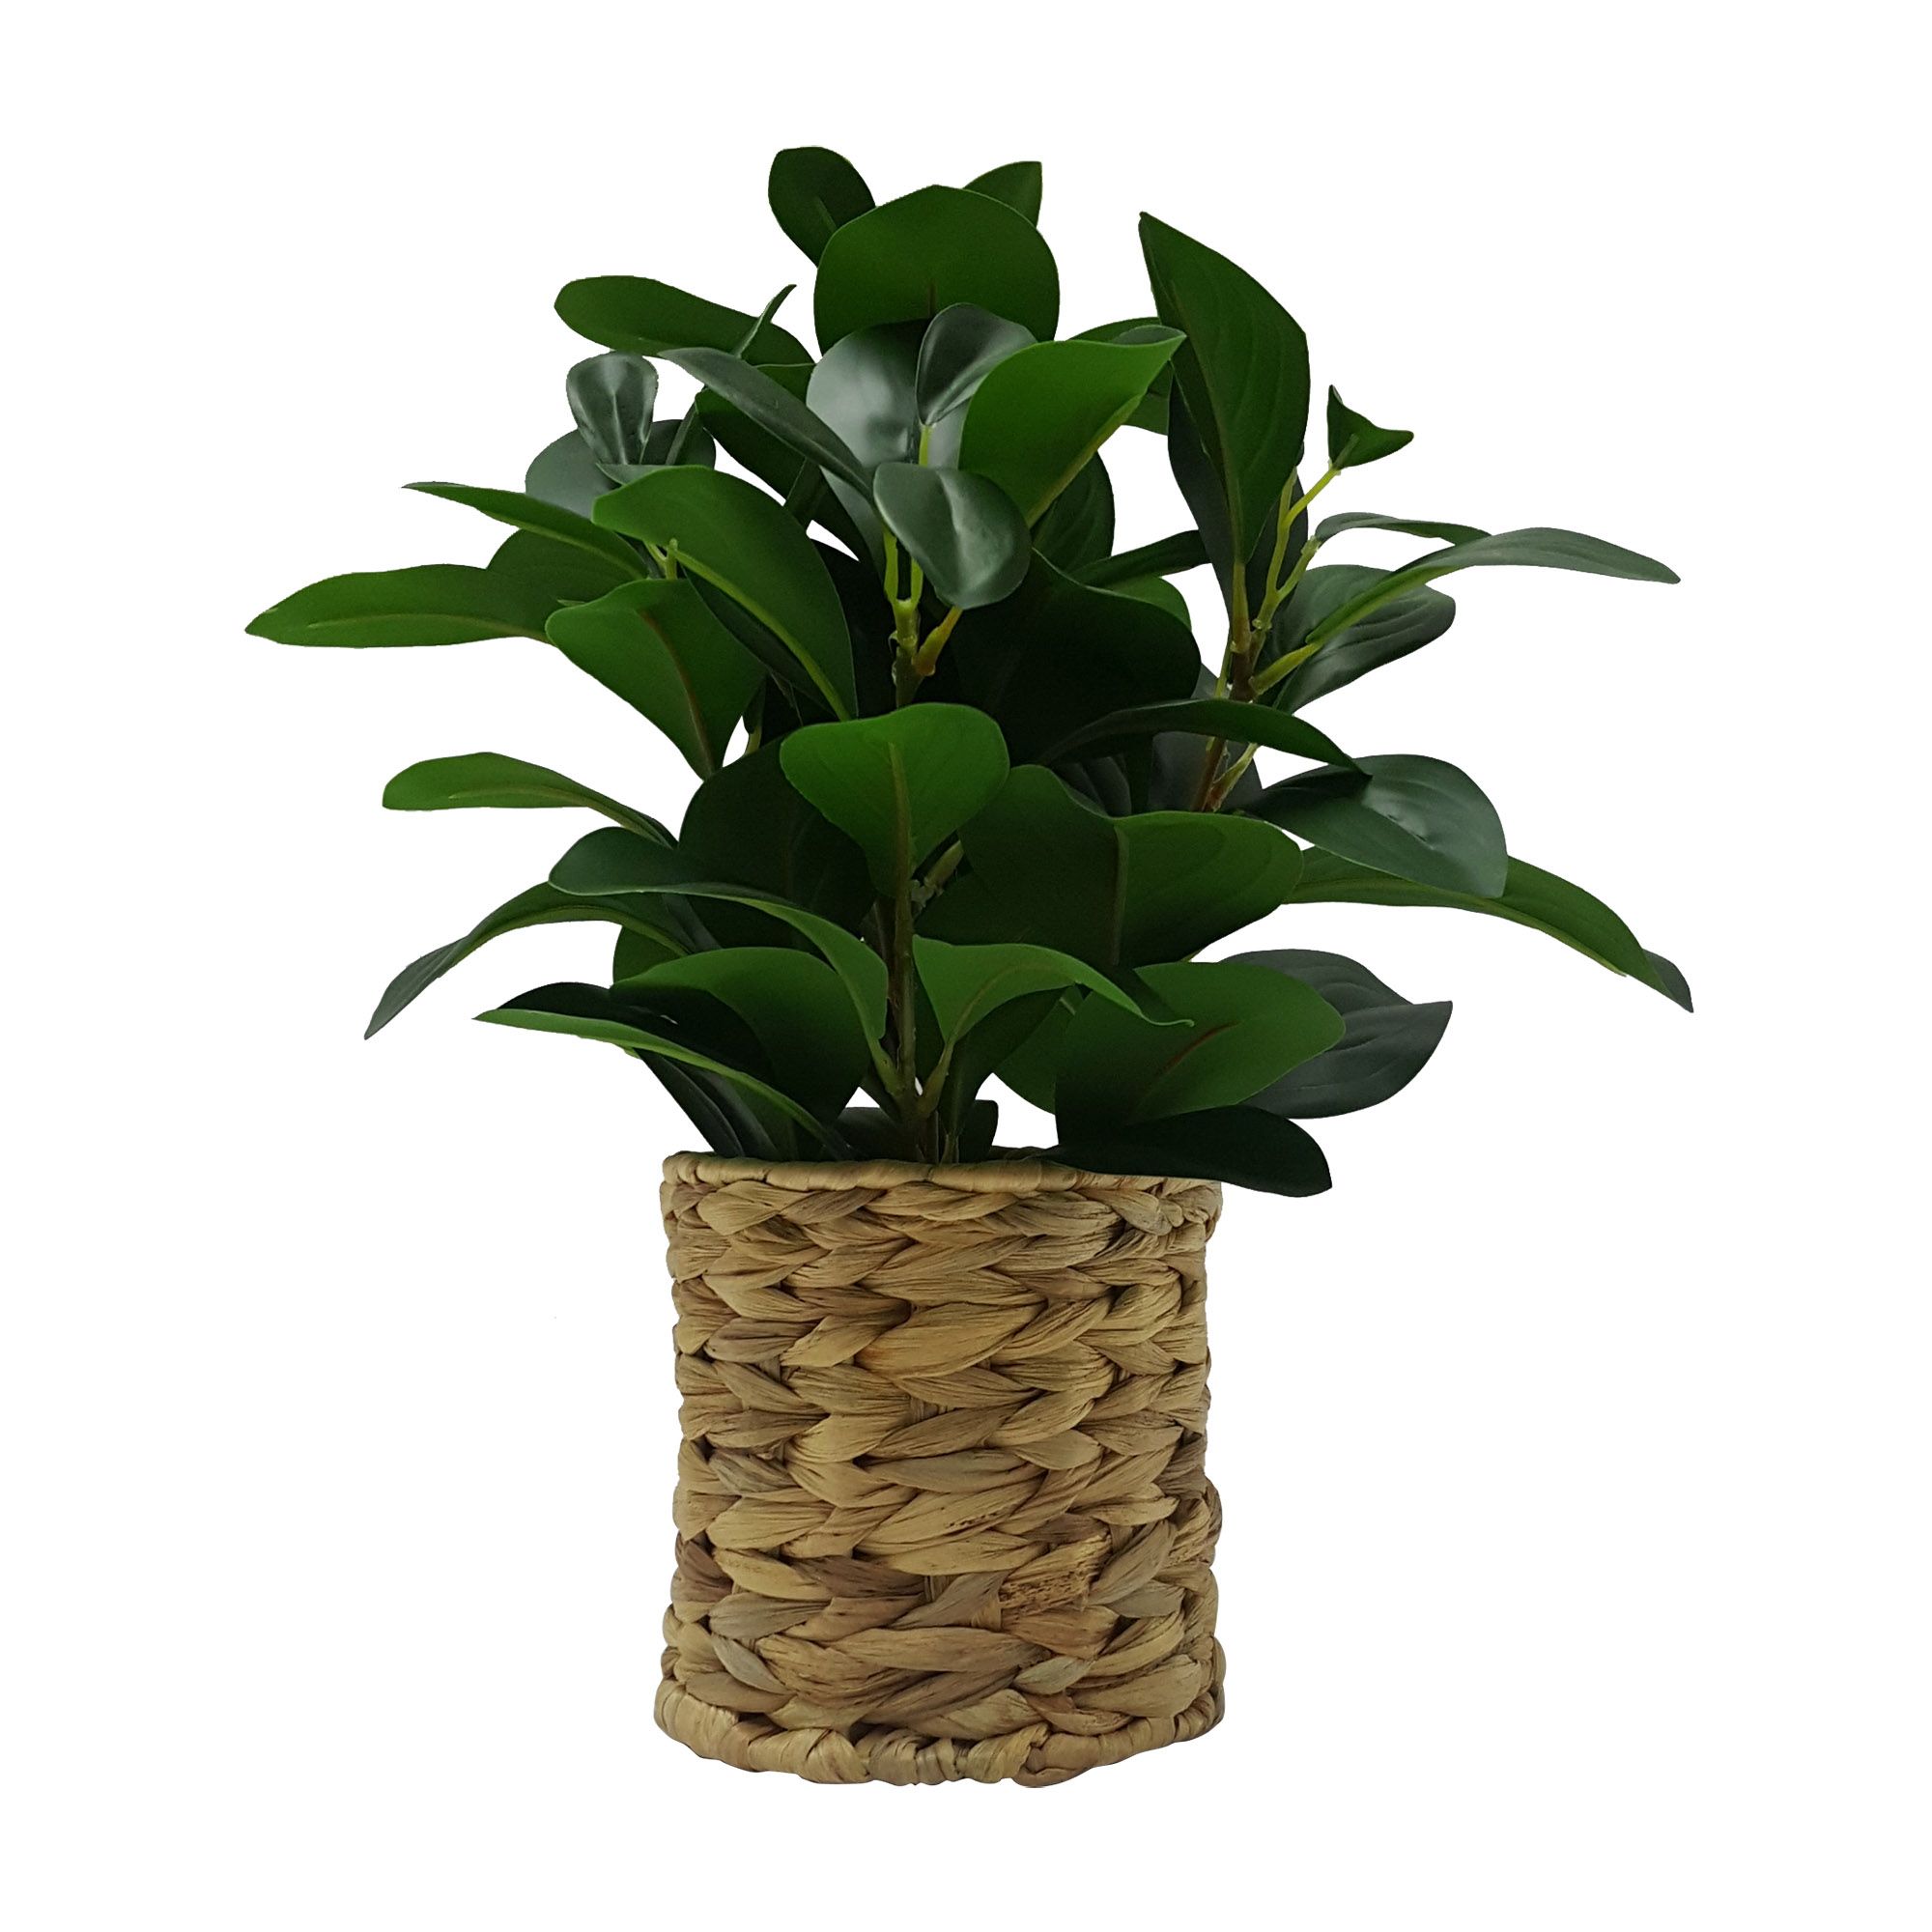 Better Homes & Gardens 13" Artificial Peperomia Plant in Natural Wicker Basket - image 5 of 5